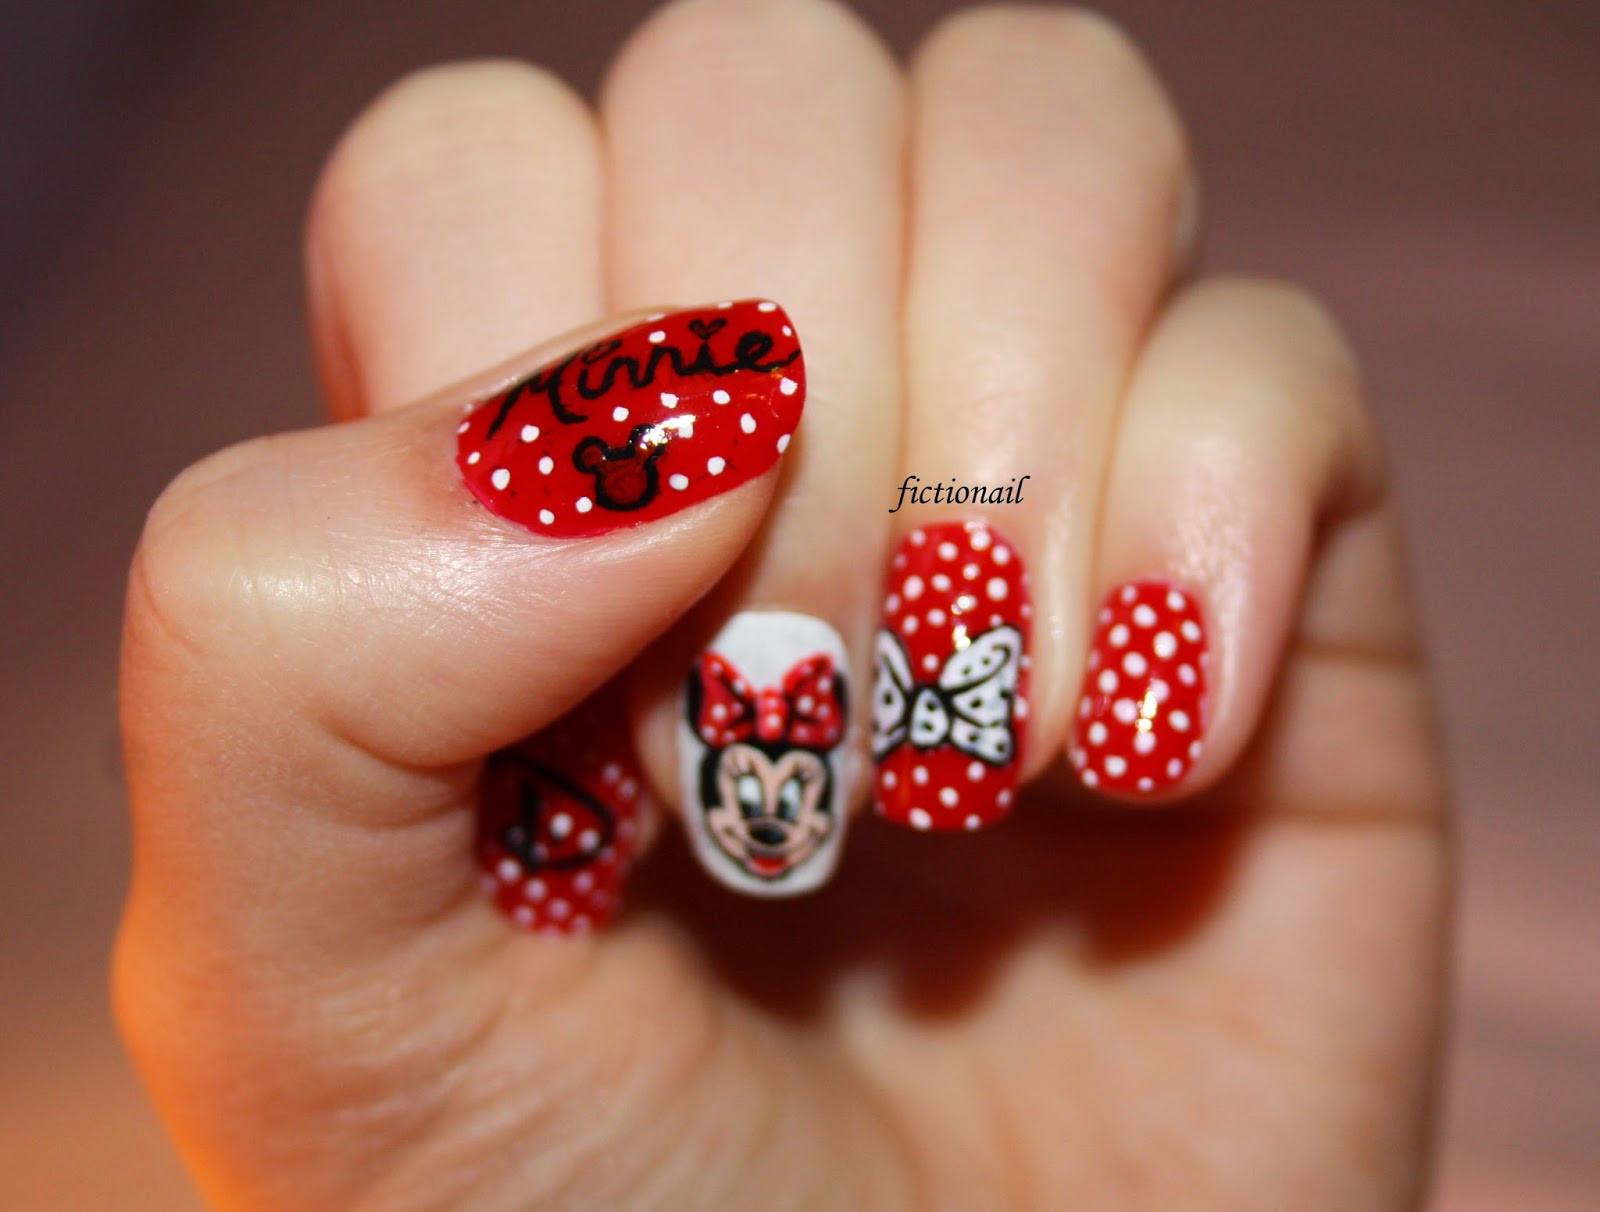 Minnie Mouse Nail Art
 Minnie Mouse Nails